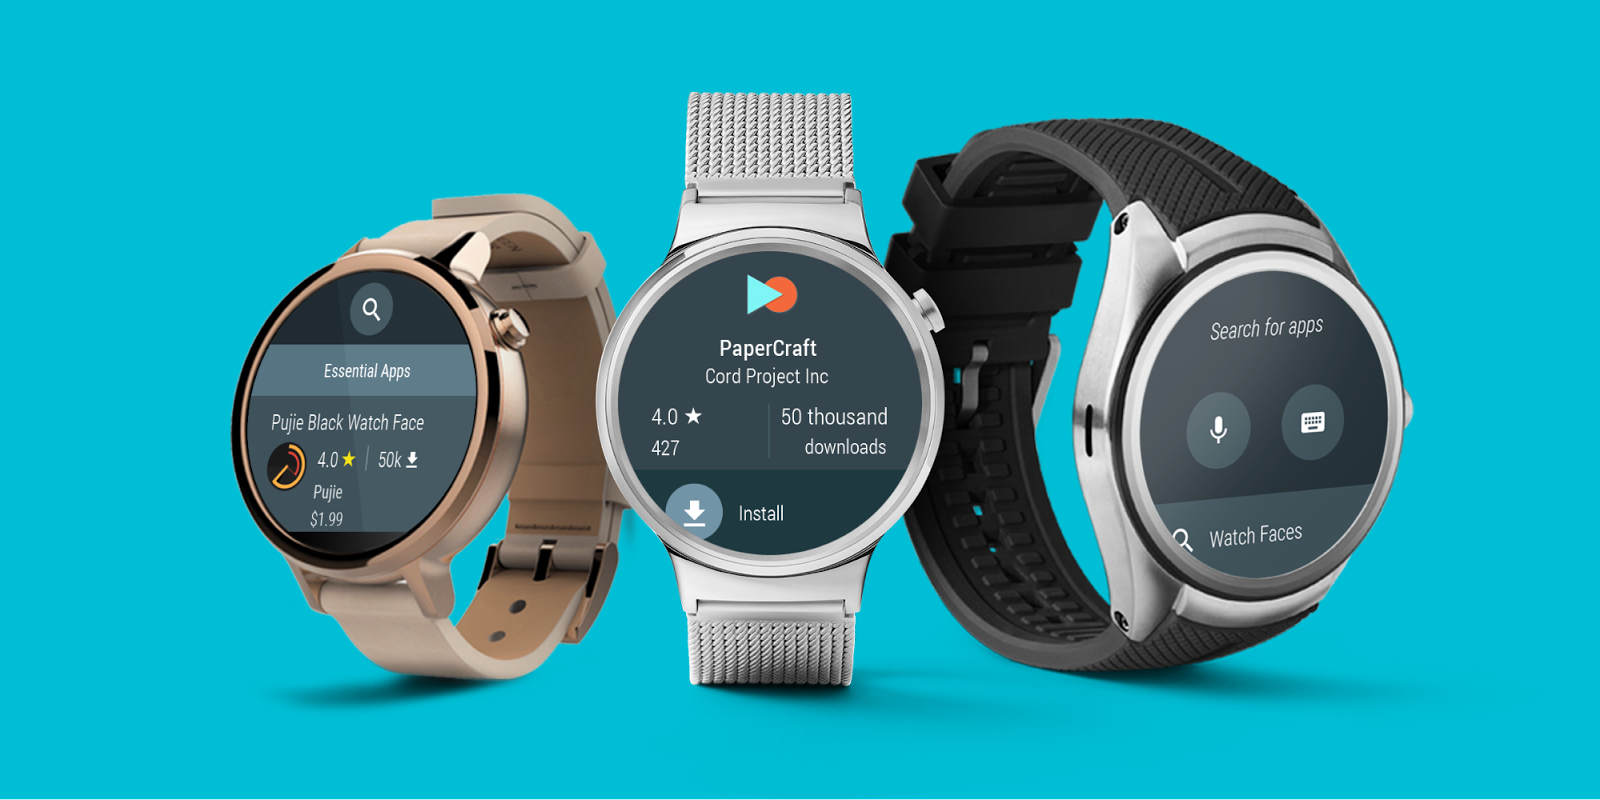 Android Wear 2.0 Developer Preview 3